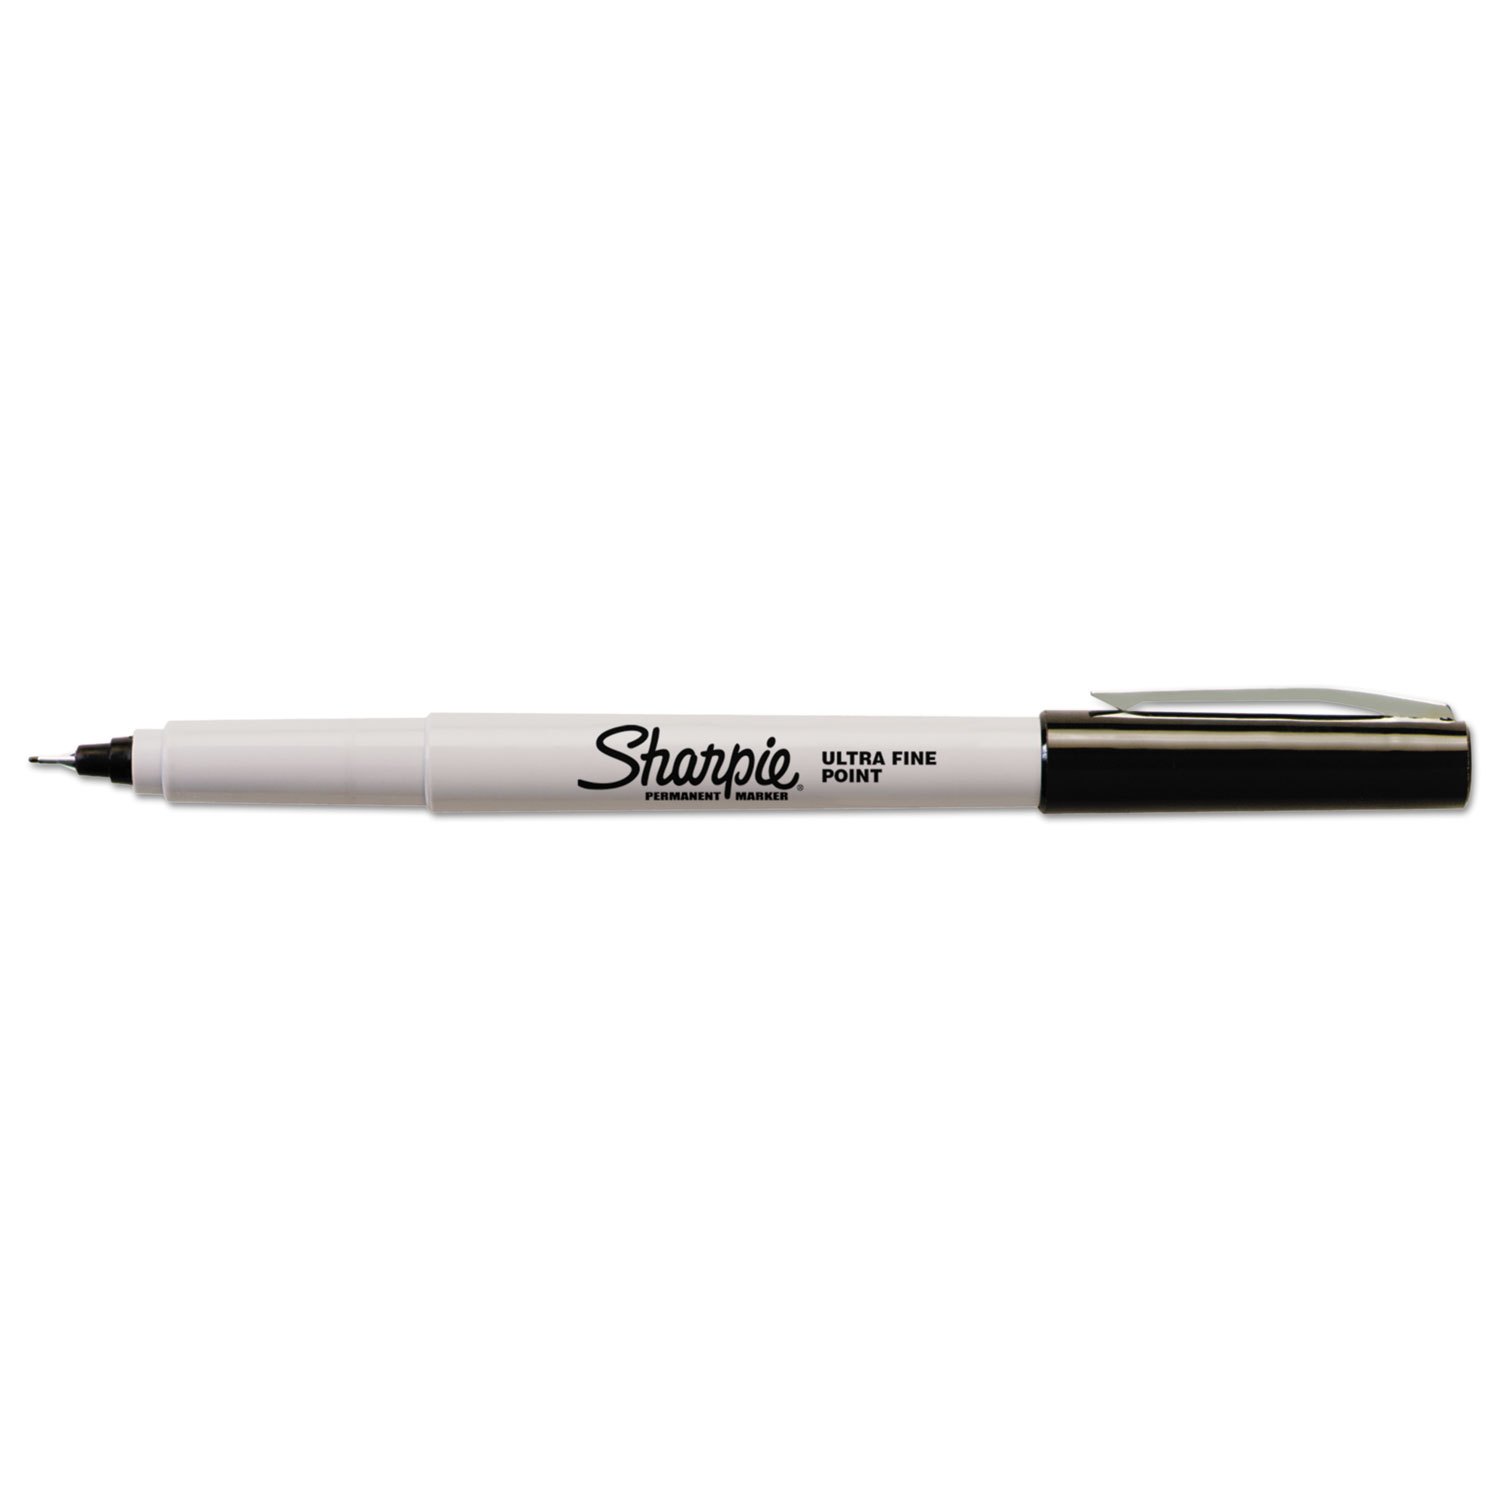 Sharpie 48-pack of Fine Tip Permanent Markers $33.99 (Retail $39.99)